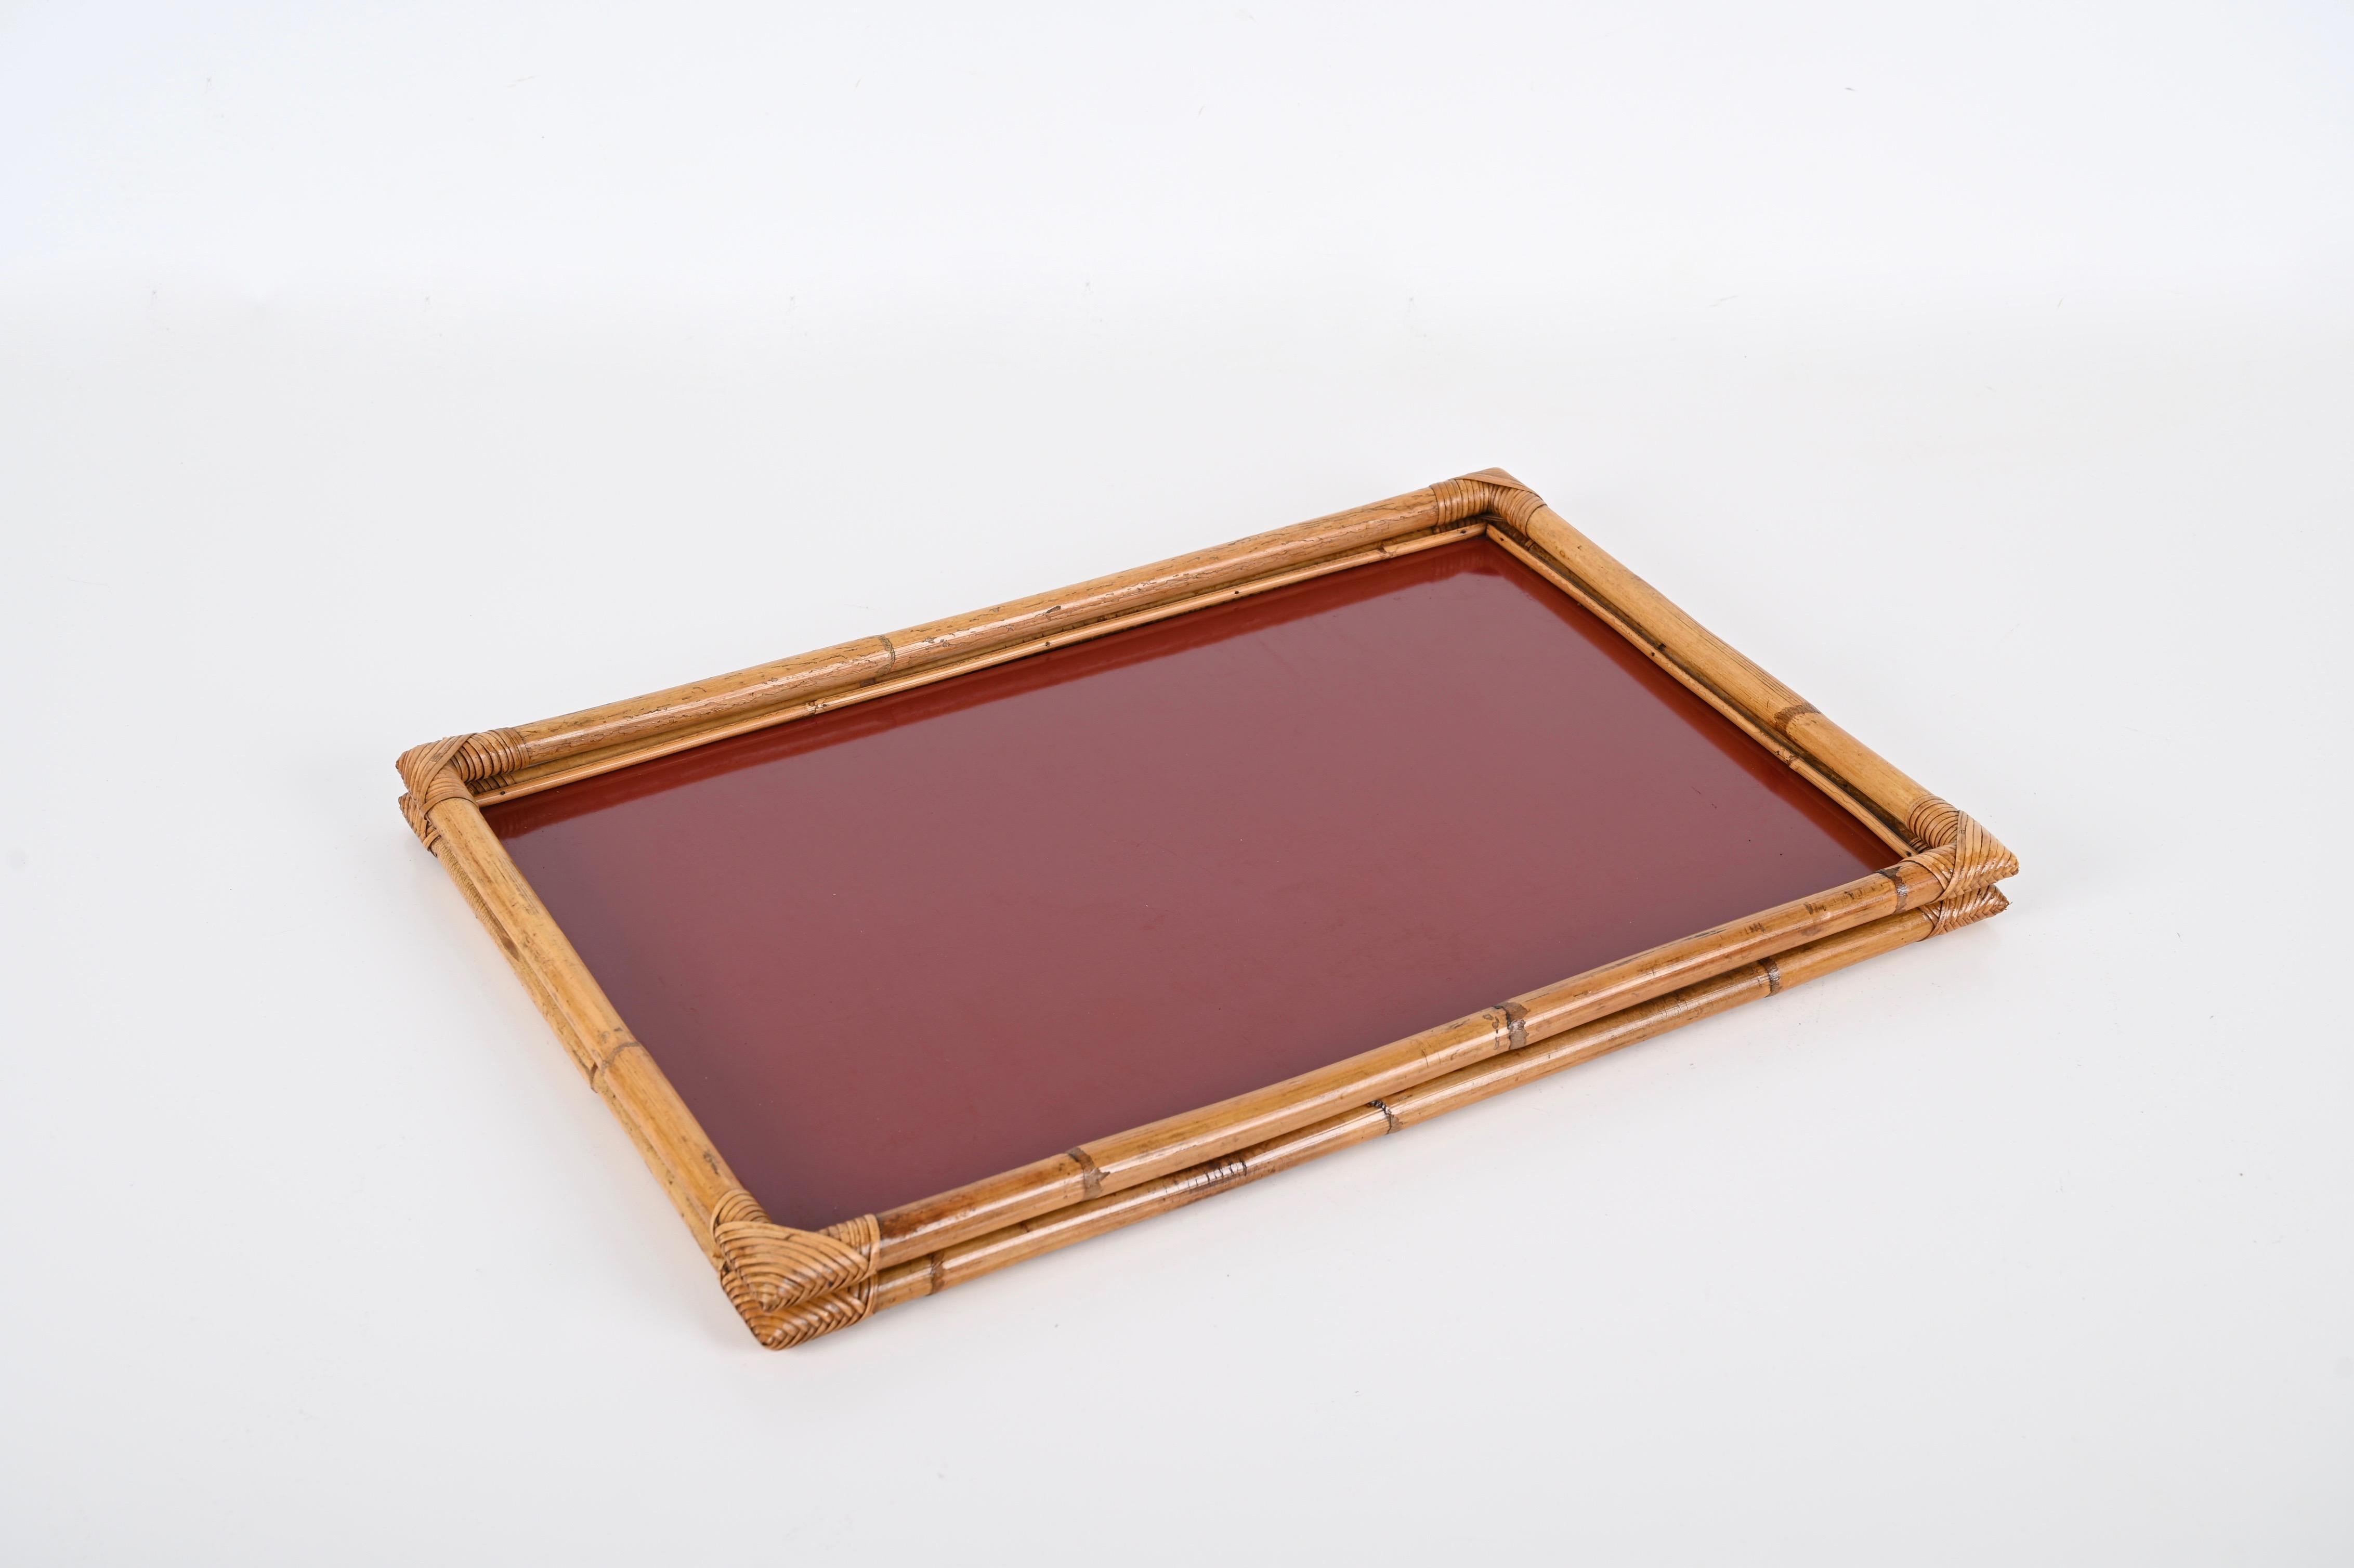 Fantastic serving tray in bamboo, rattan wicker and red bakelite. This gorgeous piece was realized by Cesare de Cesare in Italy in the 1970s and still has its brass signed plate on the back. 

The serving tray features a double frame in bamboo